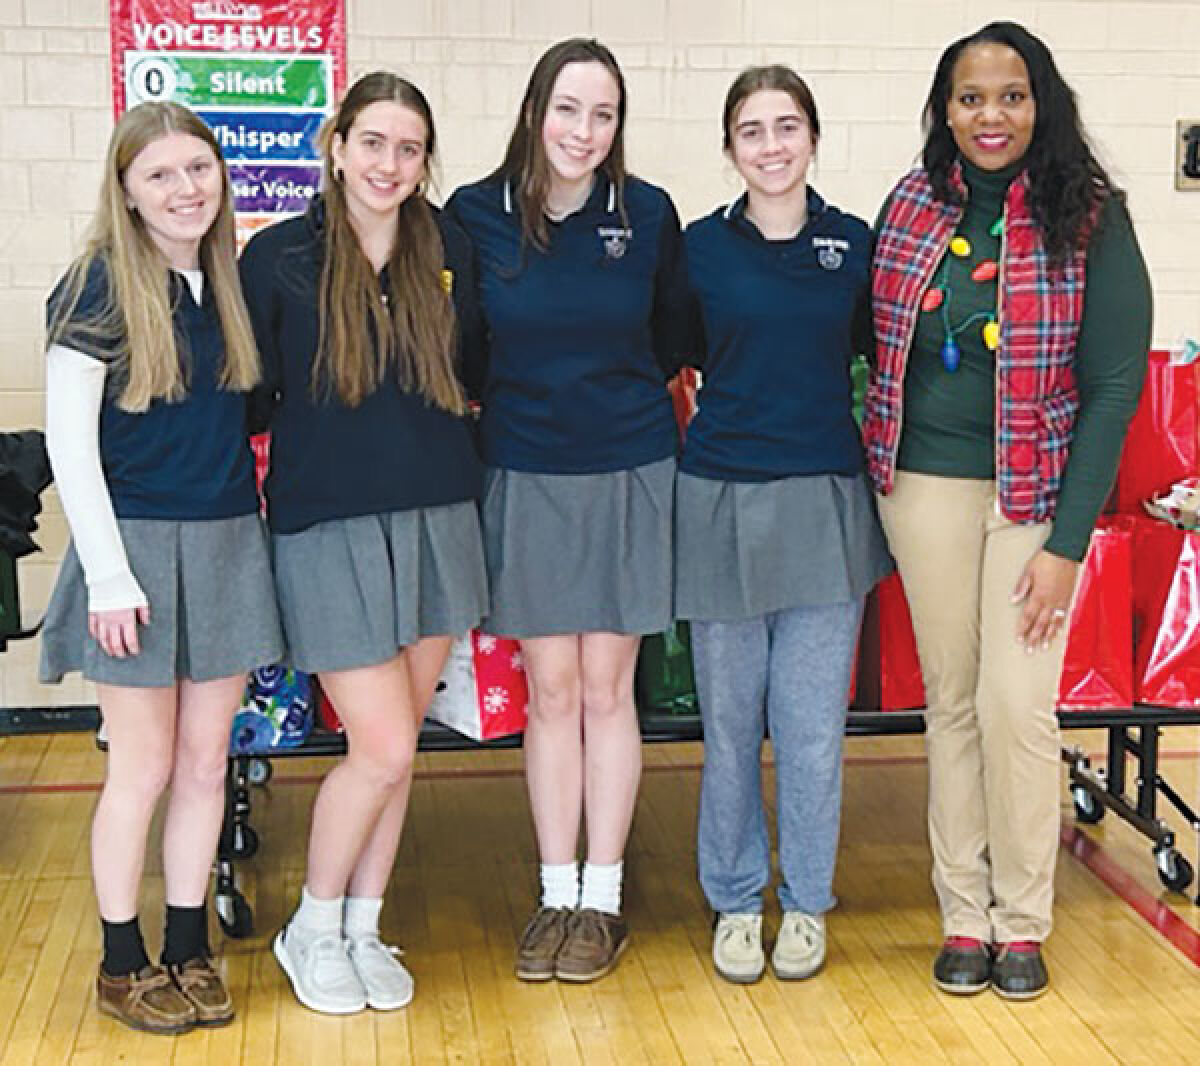  NHS officers Grace Plunkey, Catherine Murray, Madeleine Davidson and Thea Dugan stand with Brewer Academy social worker Marcia Gregory in front of a table full of gifts. 